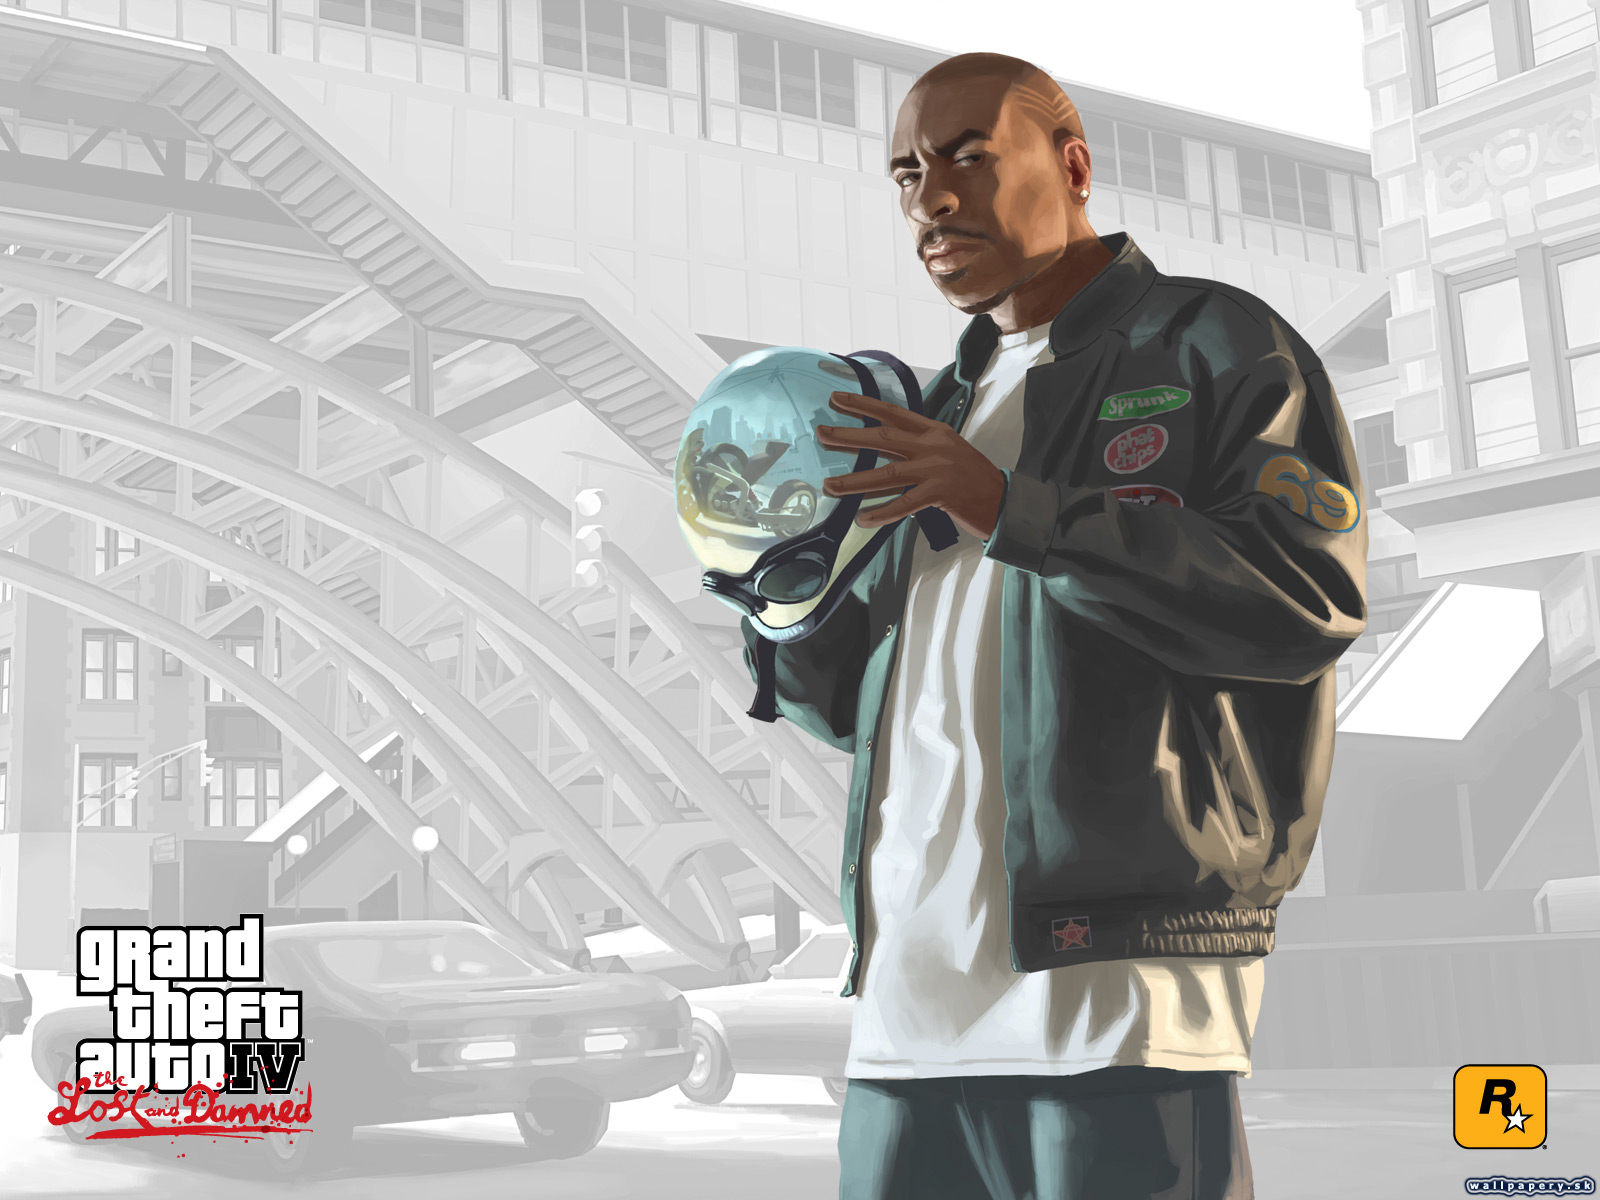 Grand Theft Auto IV: The Lost and Damned - wallpaper 3